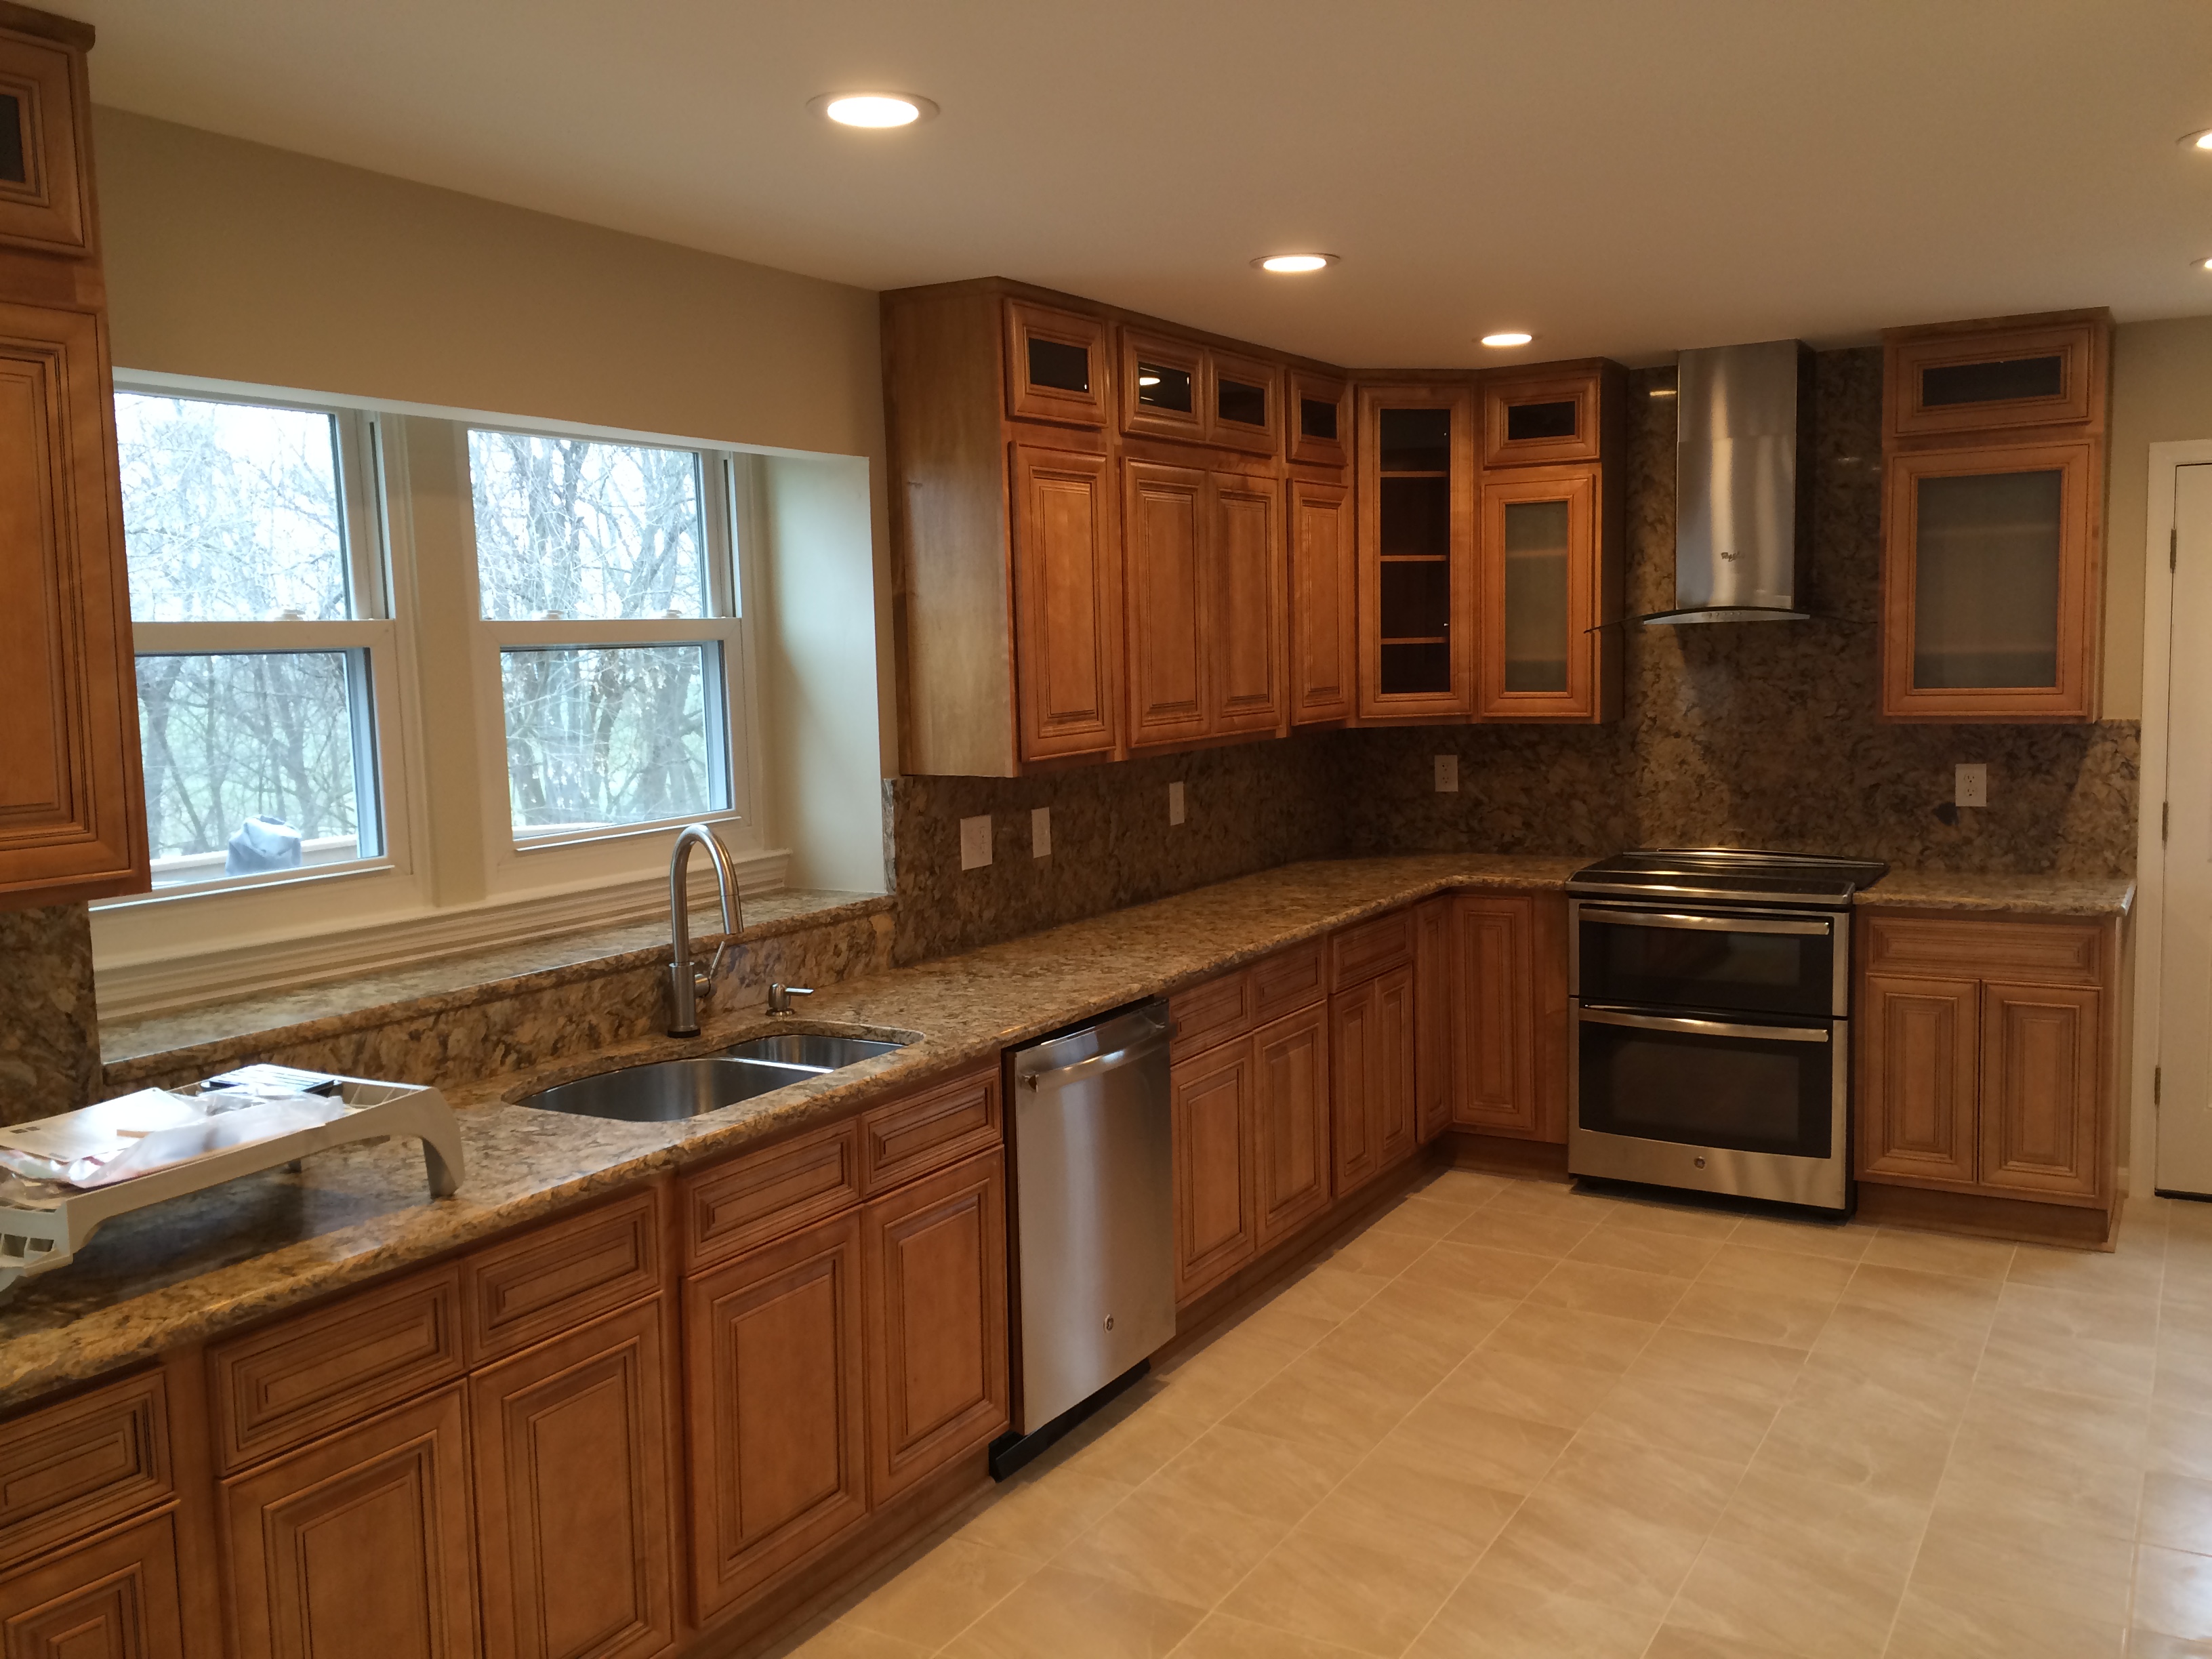 Complete Kitchen Remodeling. | Fame Kitchen and Bath, Inc.